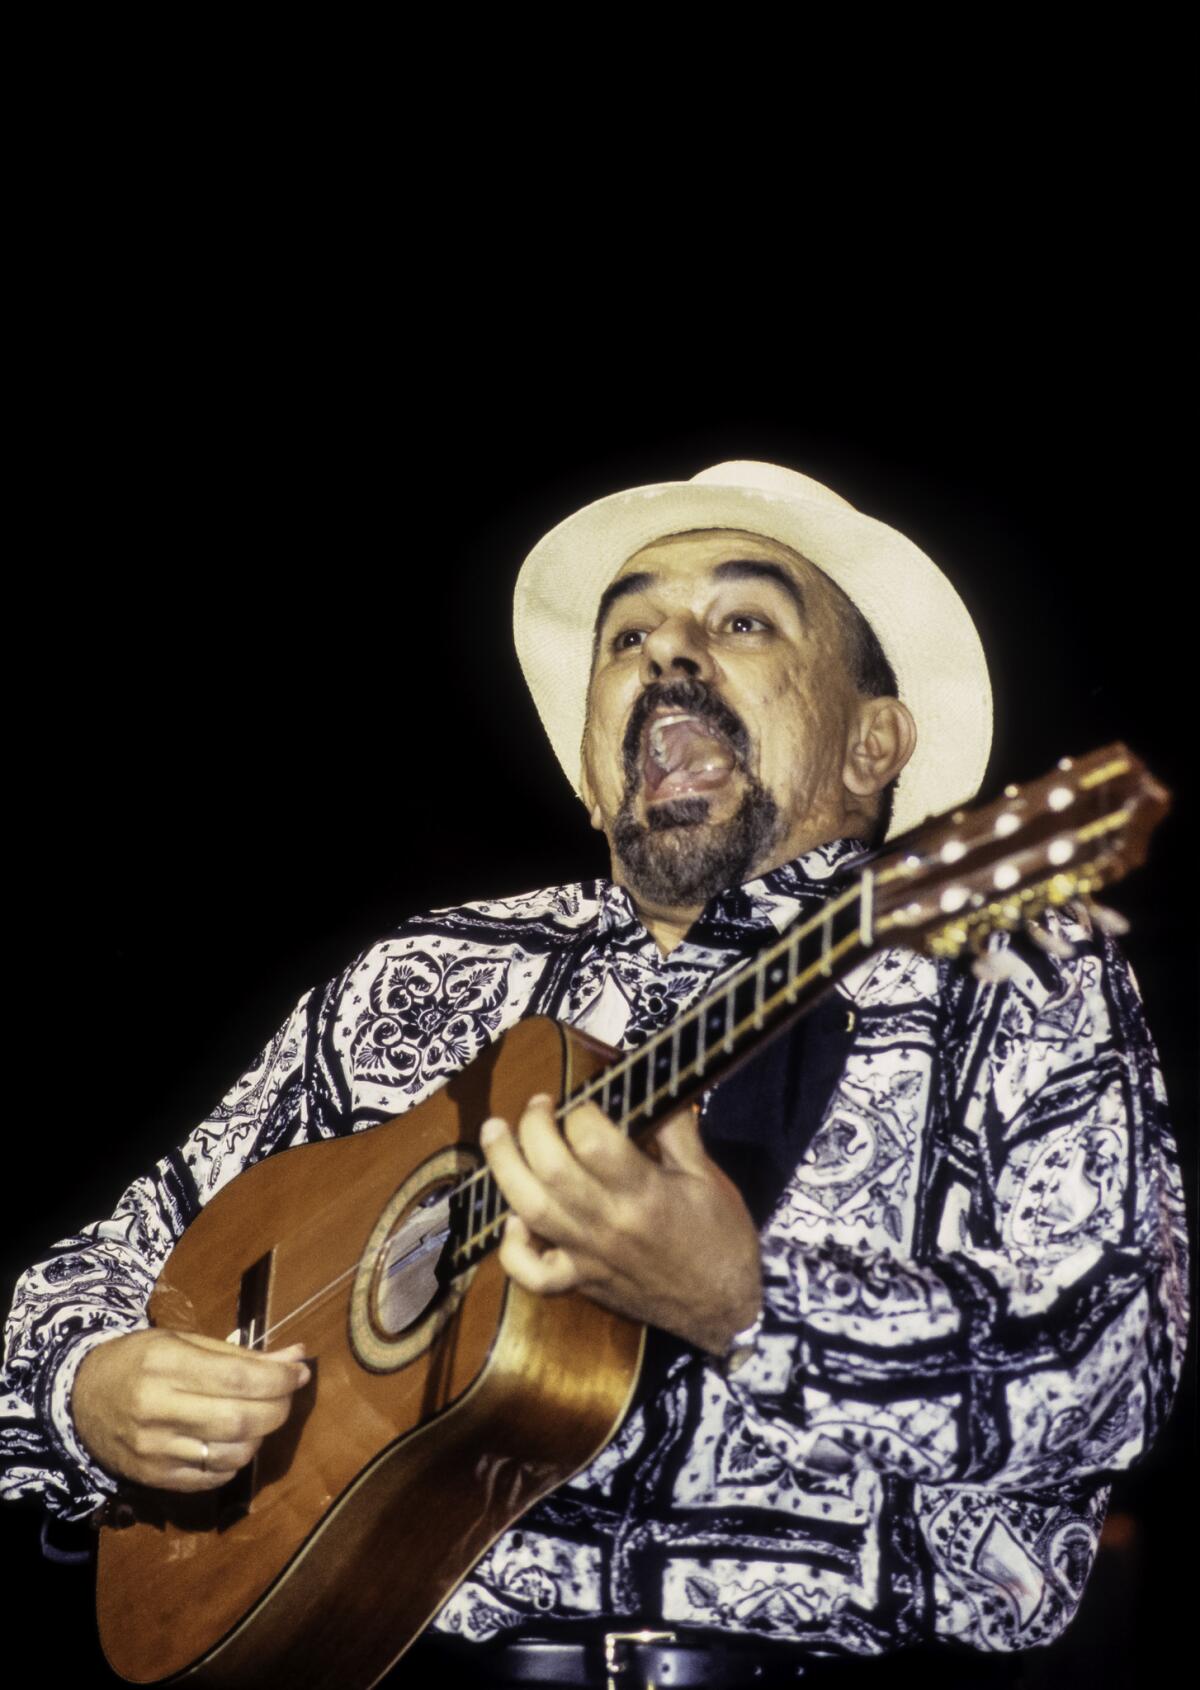 Cuba's Pancho Amat, seen in 1998 playing the tres (a six-string Cuban guitar) with the band Cubanismo during the JVC Jazz Festival's 'Habana, New York' concert at Hammerstein Ballroom.